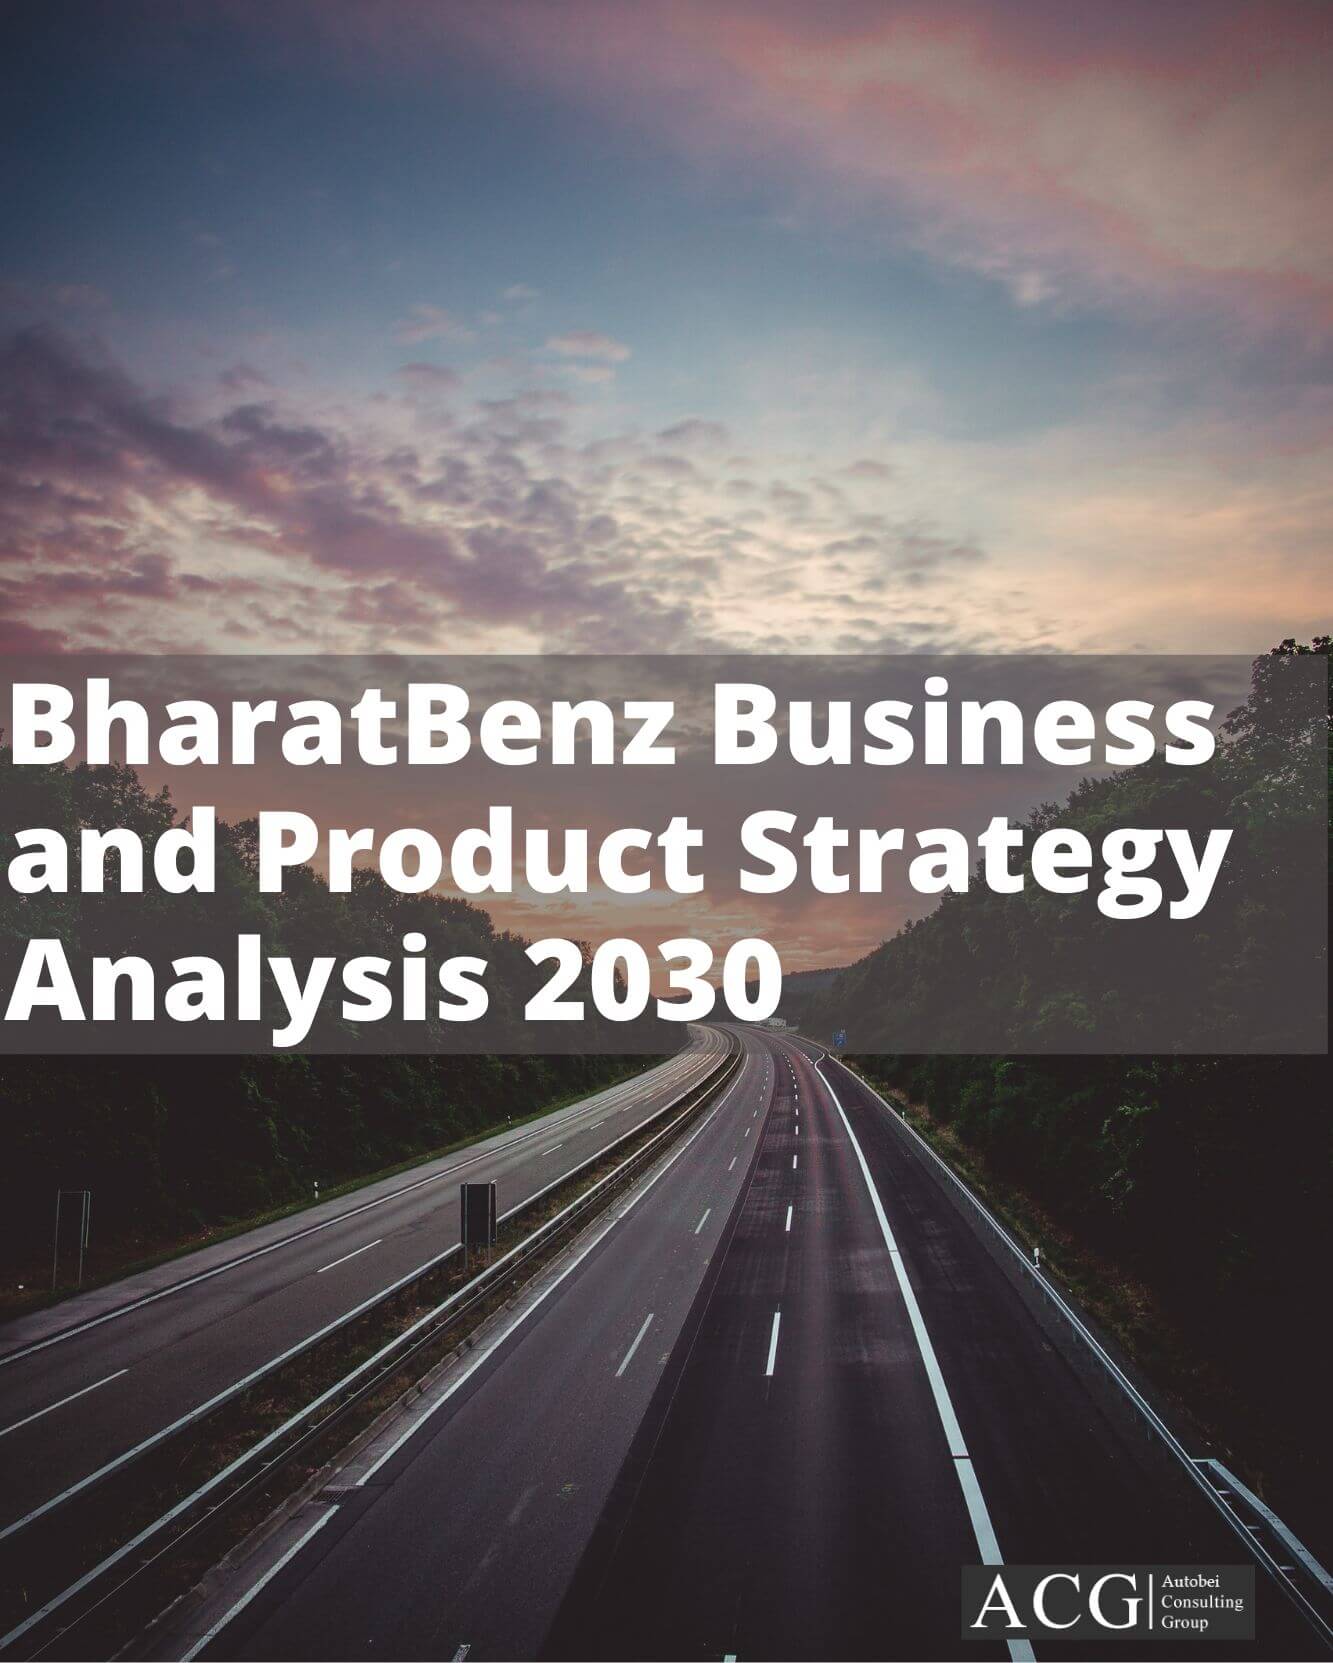 BharatBenz Business and Product Strategy Analysis 2030